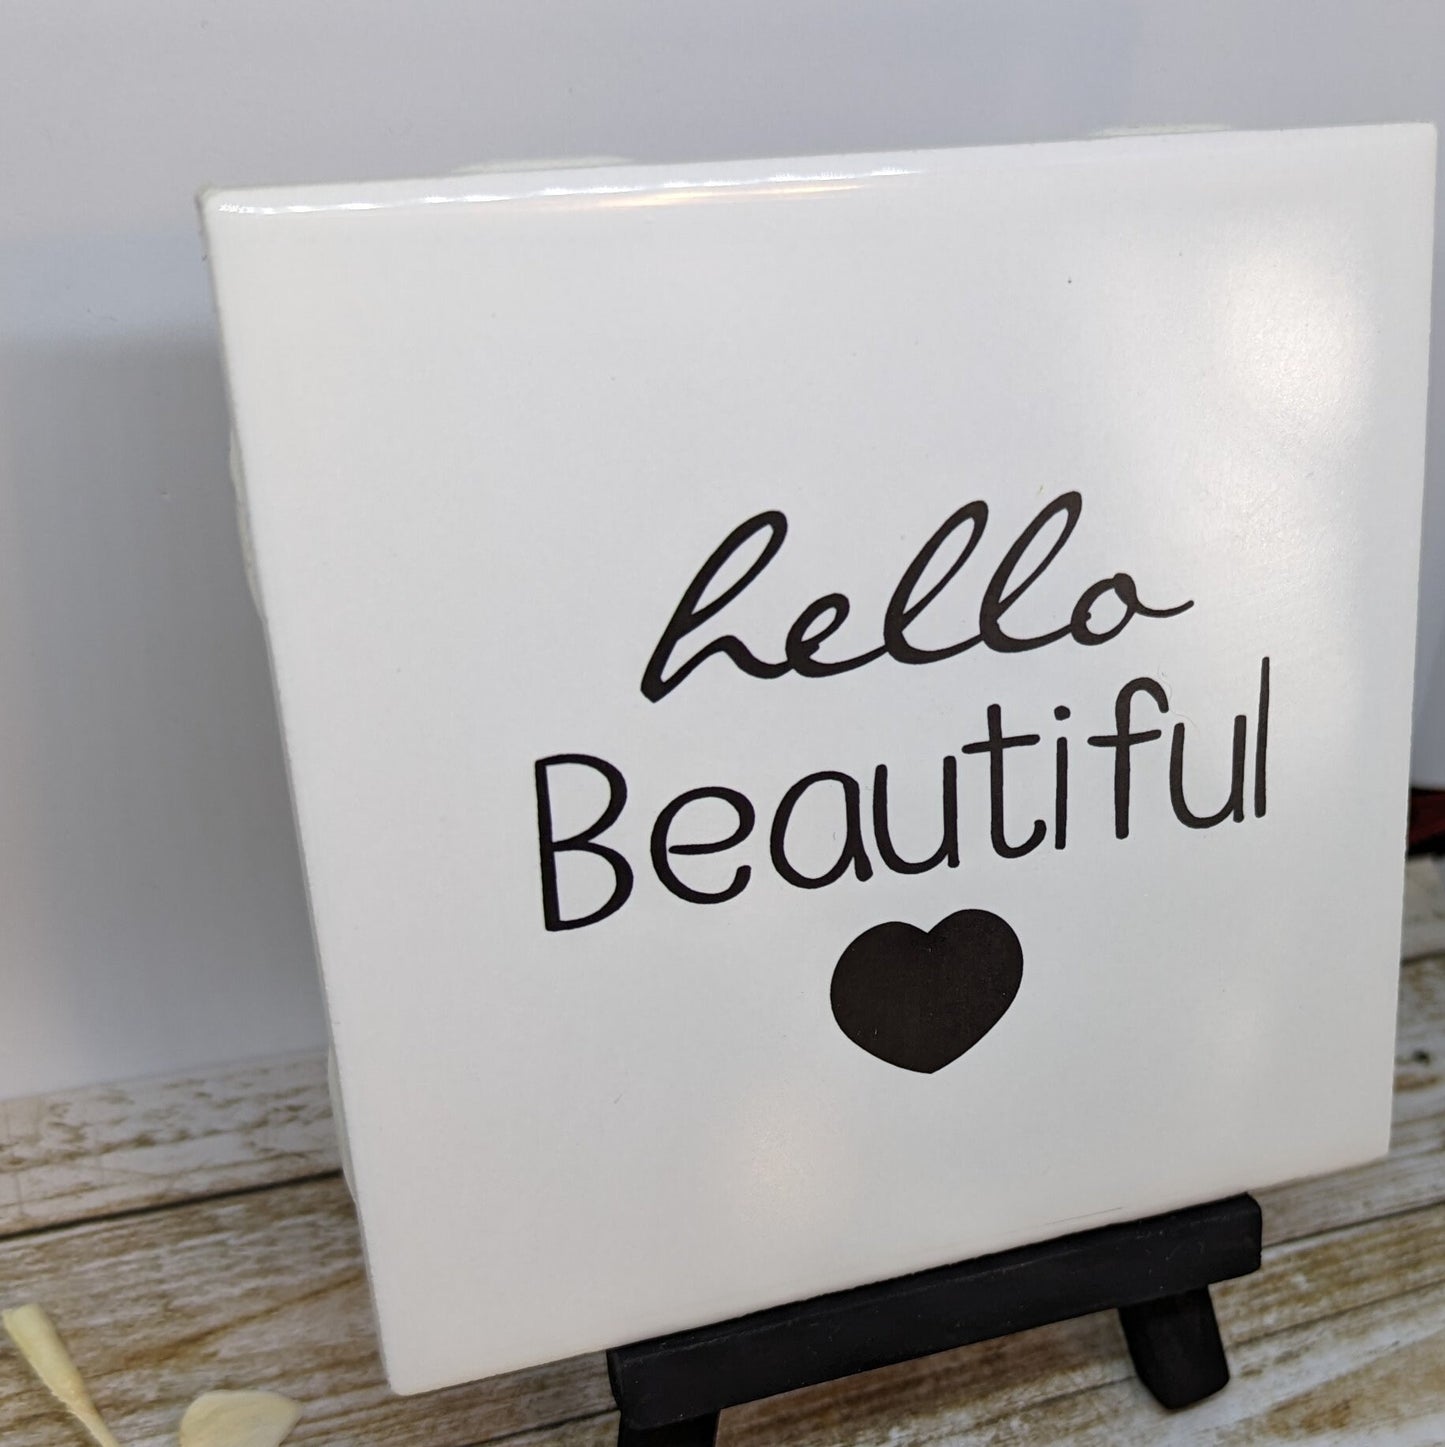 Hello Beautiful Mini Easel Sign - easel included, your color choice